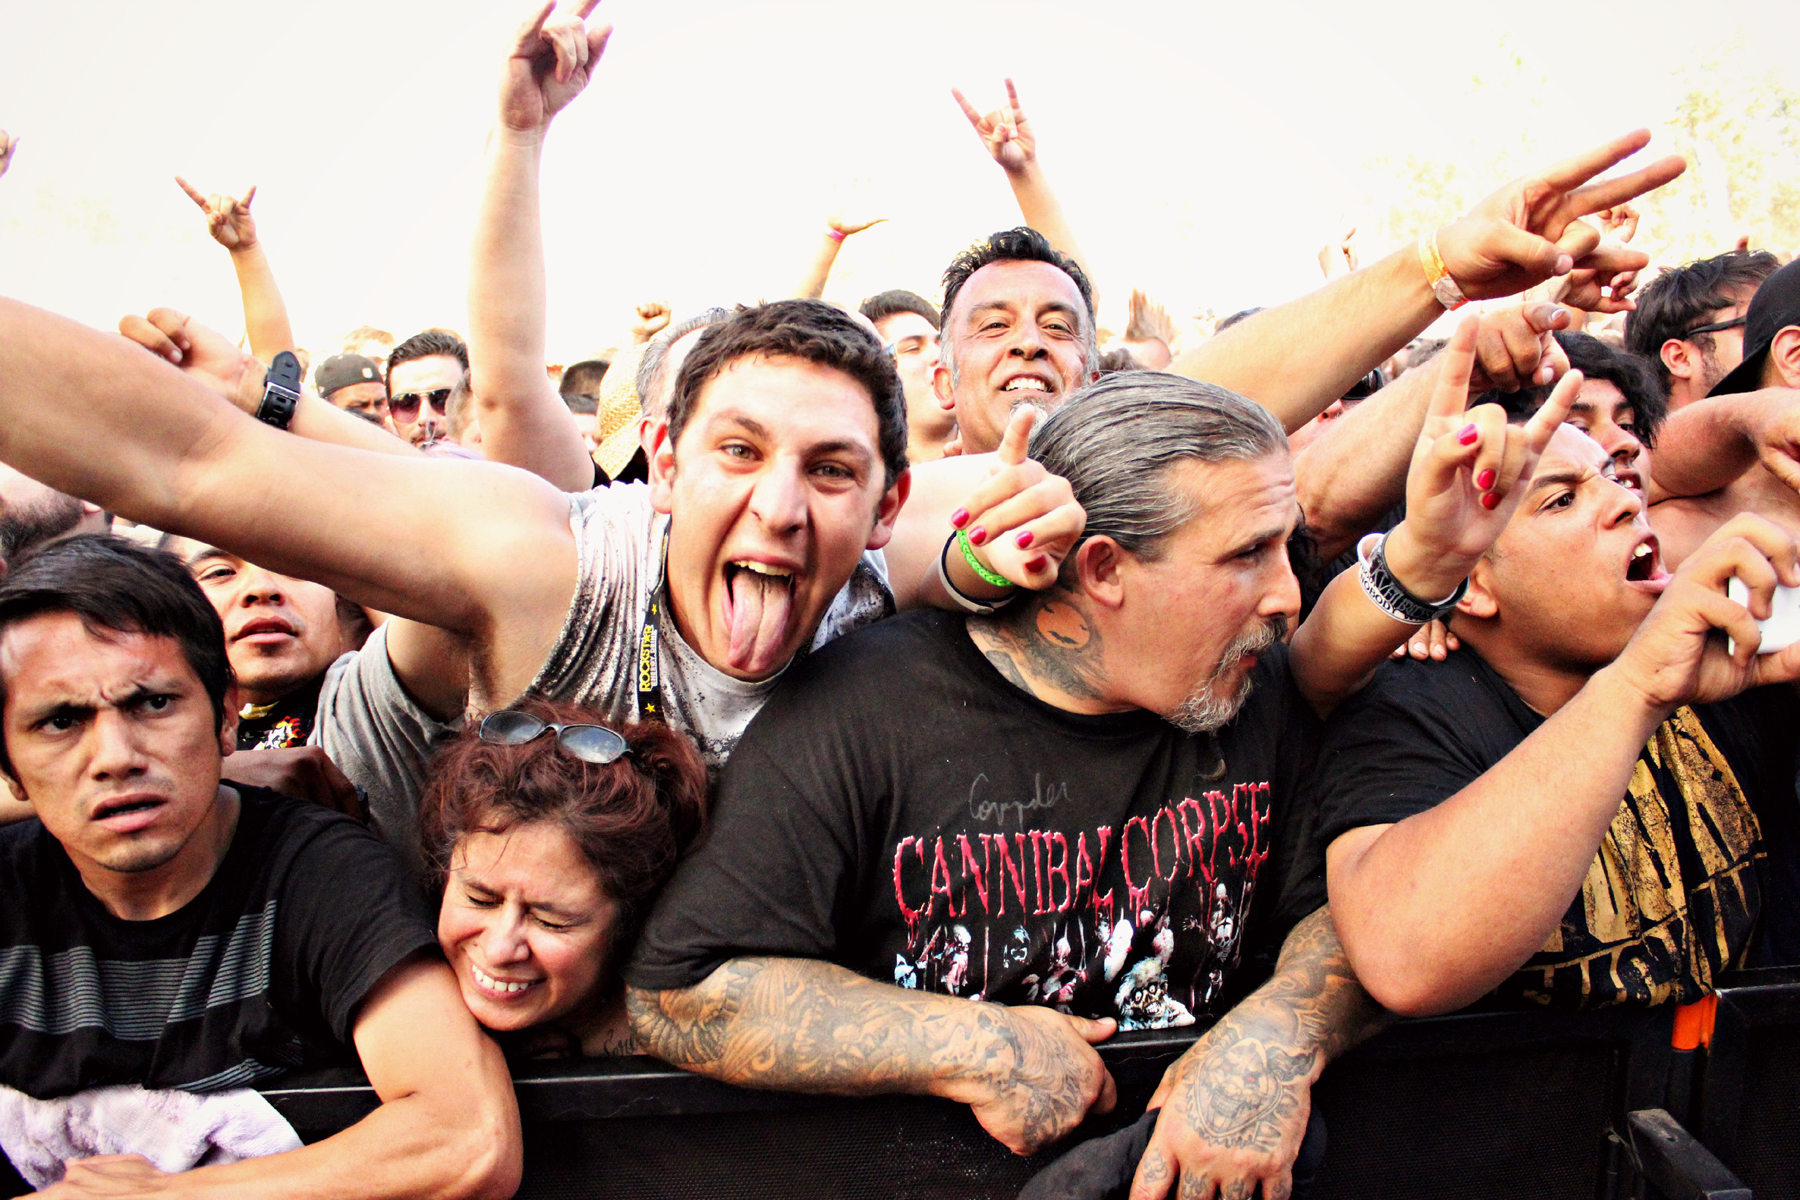 Fans during the Suicide Silence set